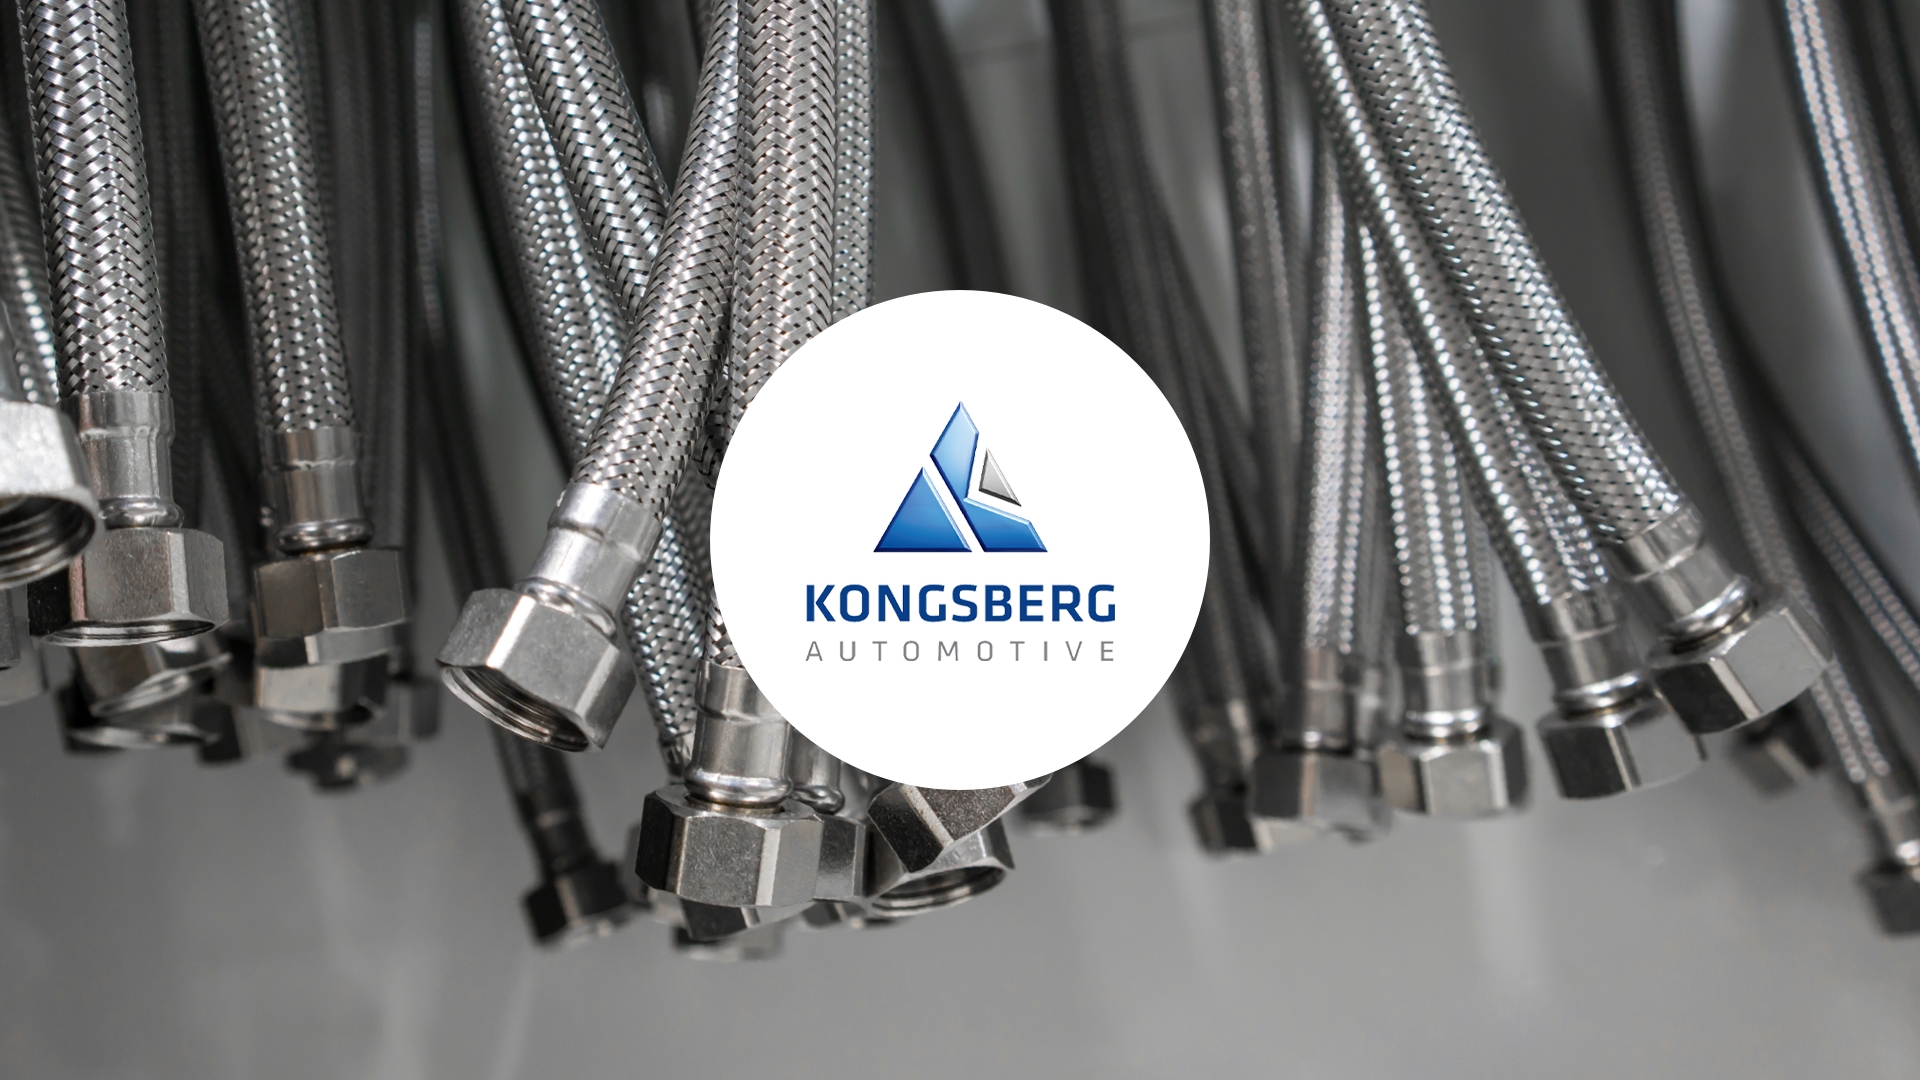 Find out more about Gemba and kongsberg automotive